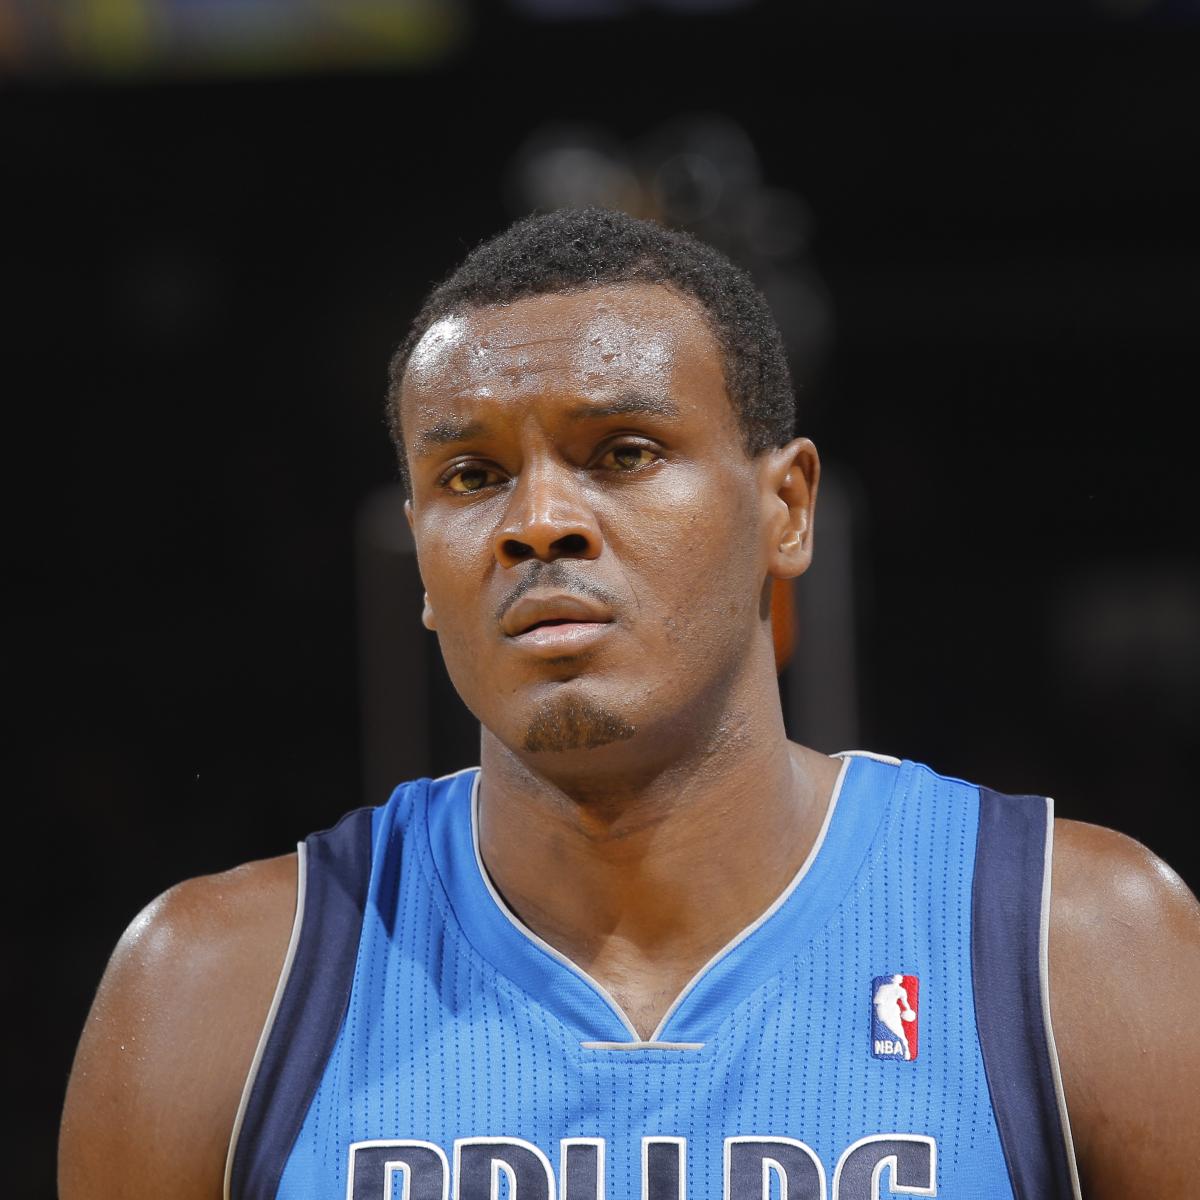 The 42-year old son of father (?) and mother(?) Samuel Dalembert in 2024 photo. Samuel Dalembert earned a  million dollar salary - leaving the net worth at 2 million in 2024